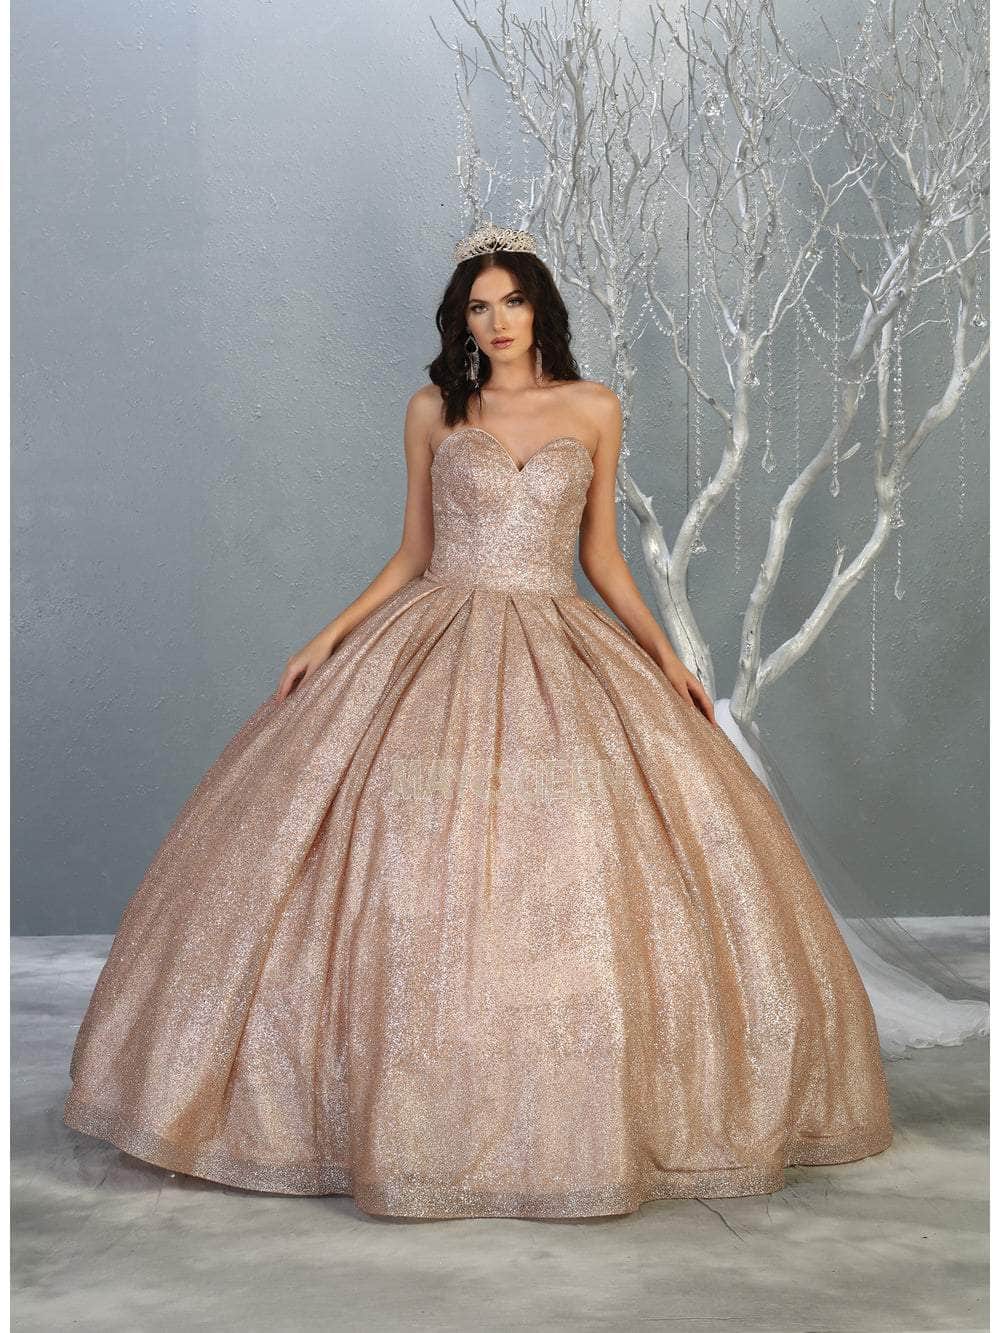 May Queen - LK138 Strapless Sweetheart Pleated Ballgown Quinceanera Dresses 4 / Rosegold